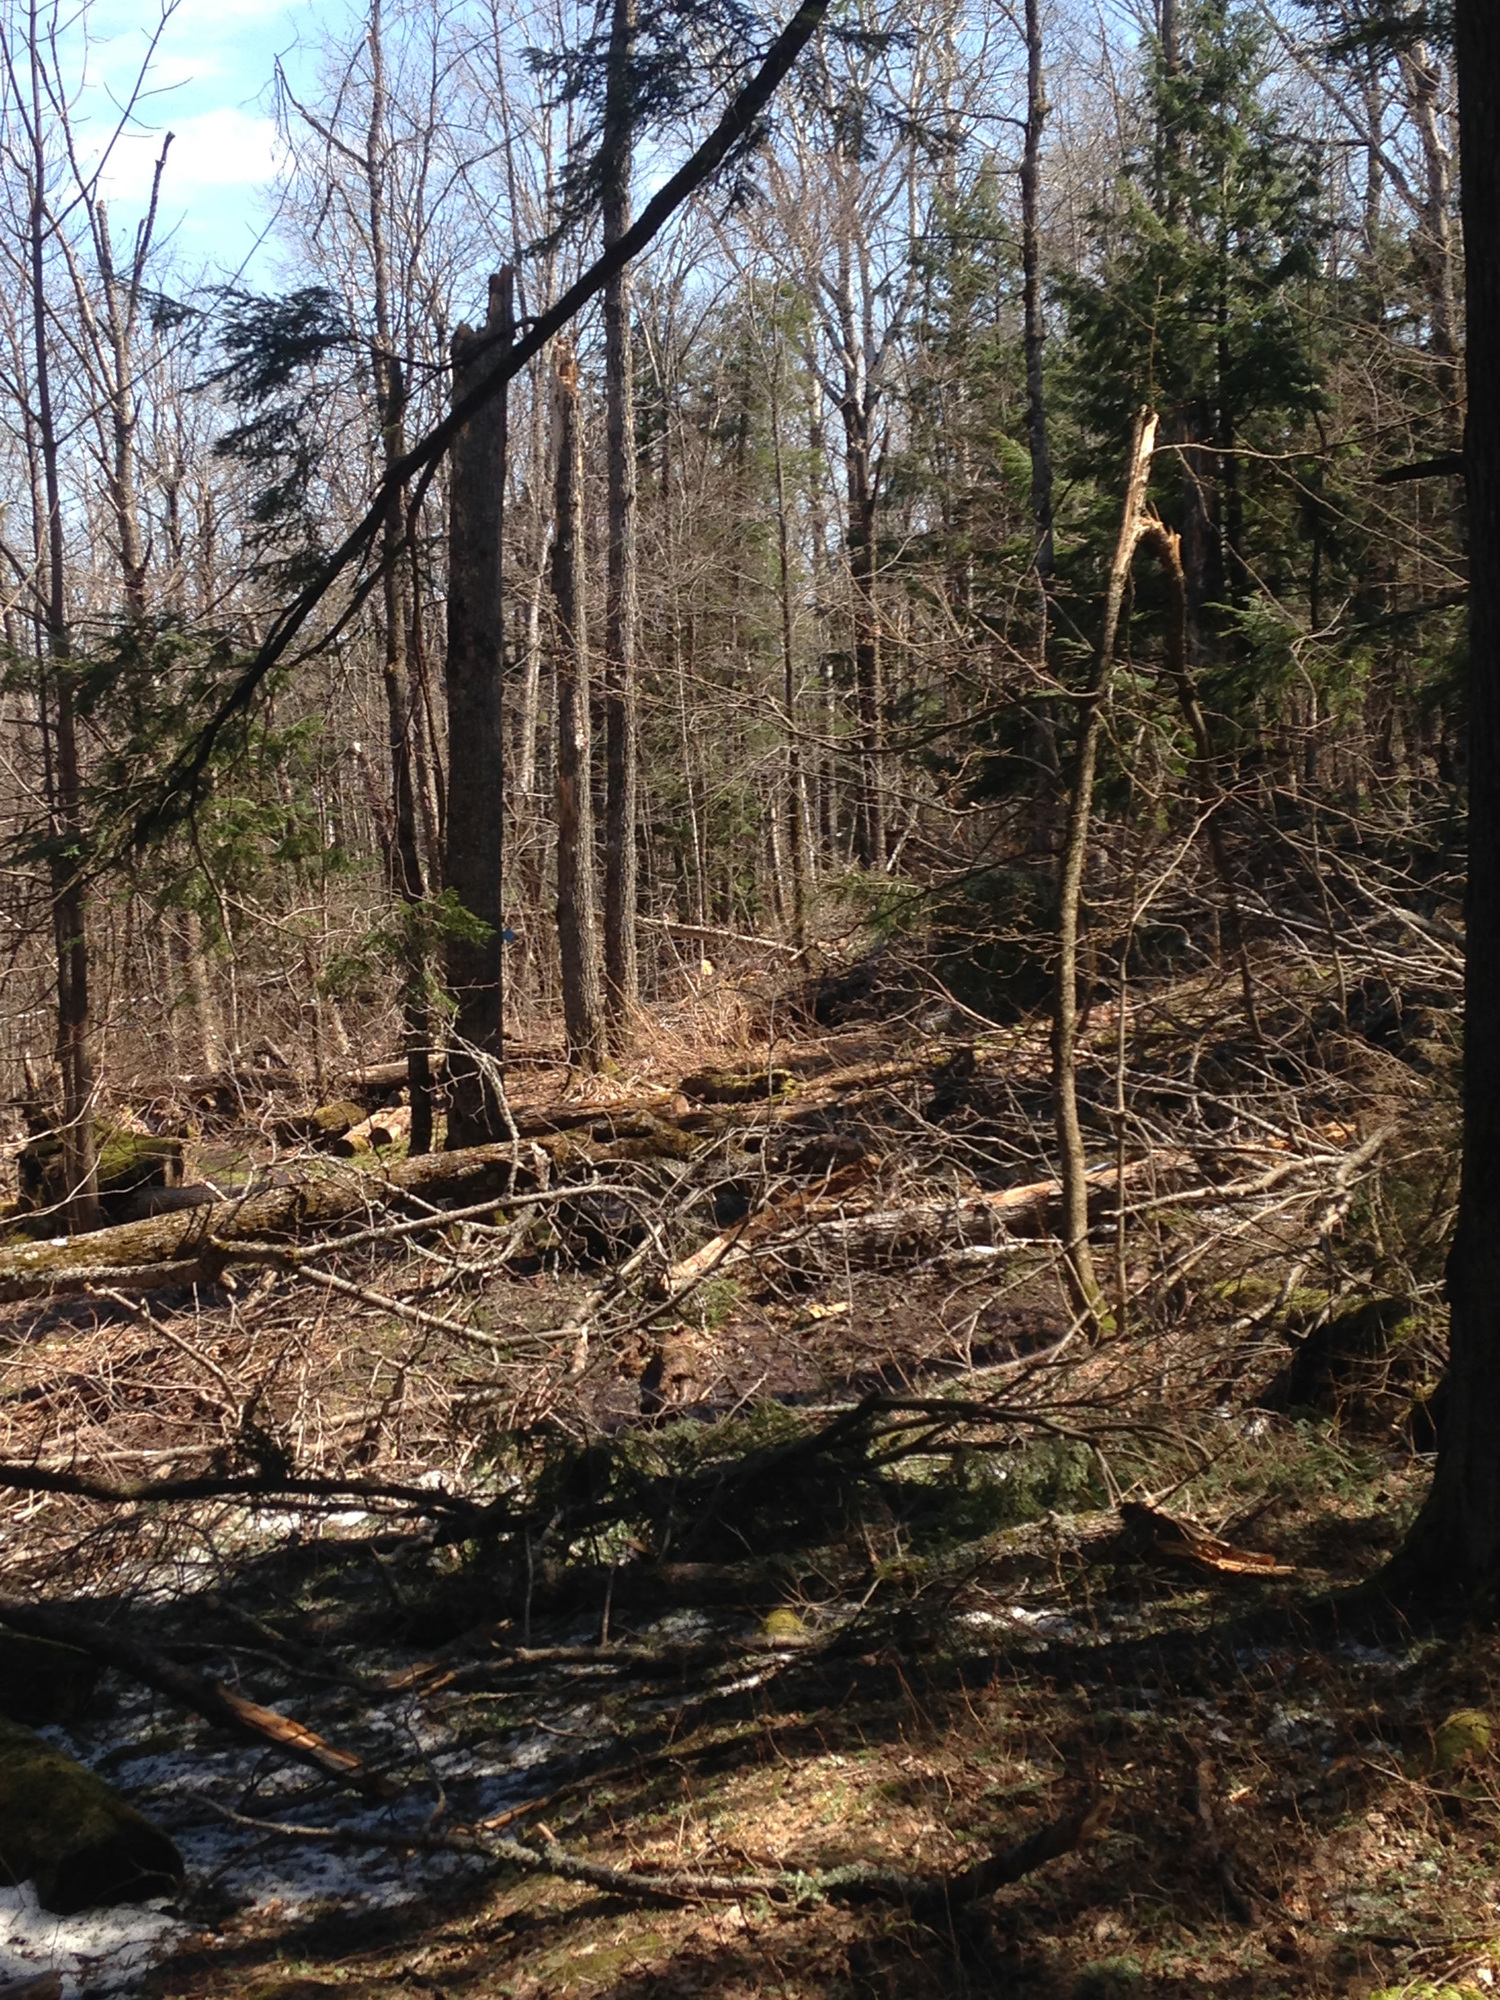 Treefall damage found along Union Spring Trail at Porcupine Mountains Wilderness State Park.